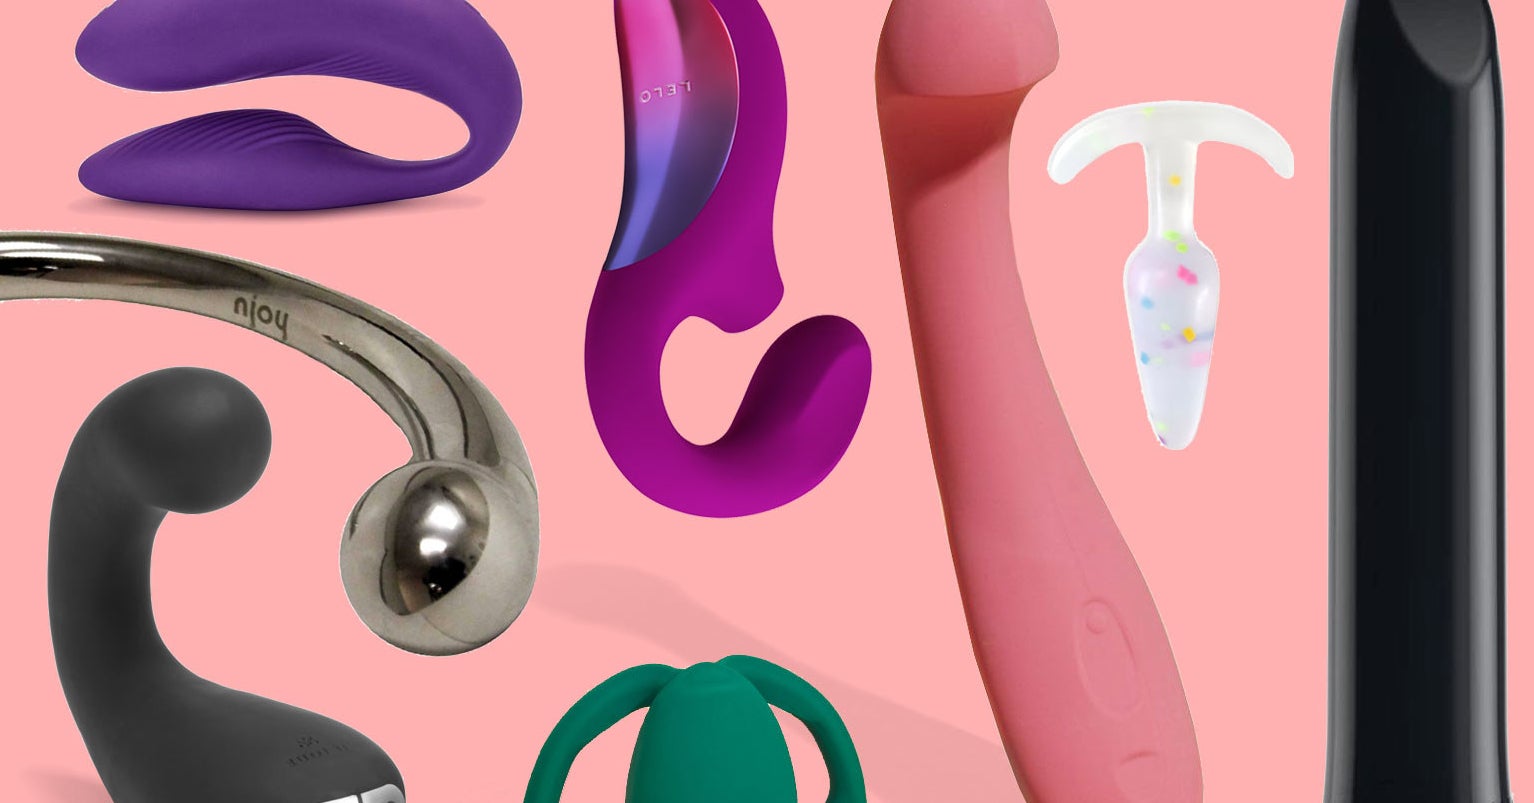 25 Most Mind-Blowing Sex Toys for Couples